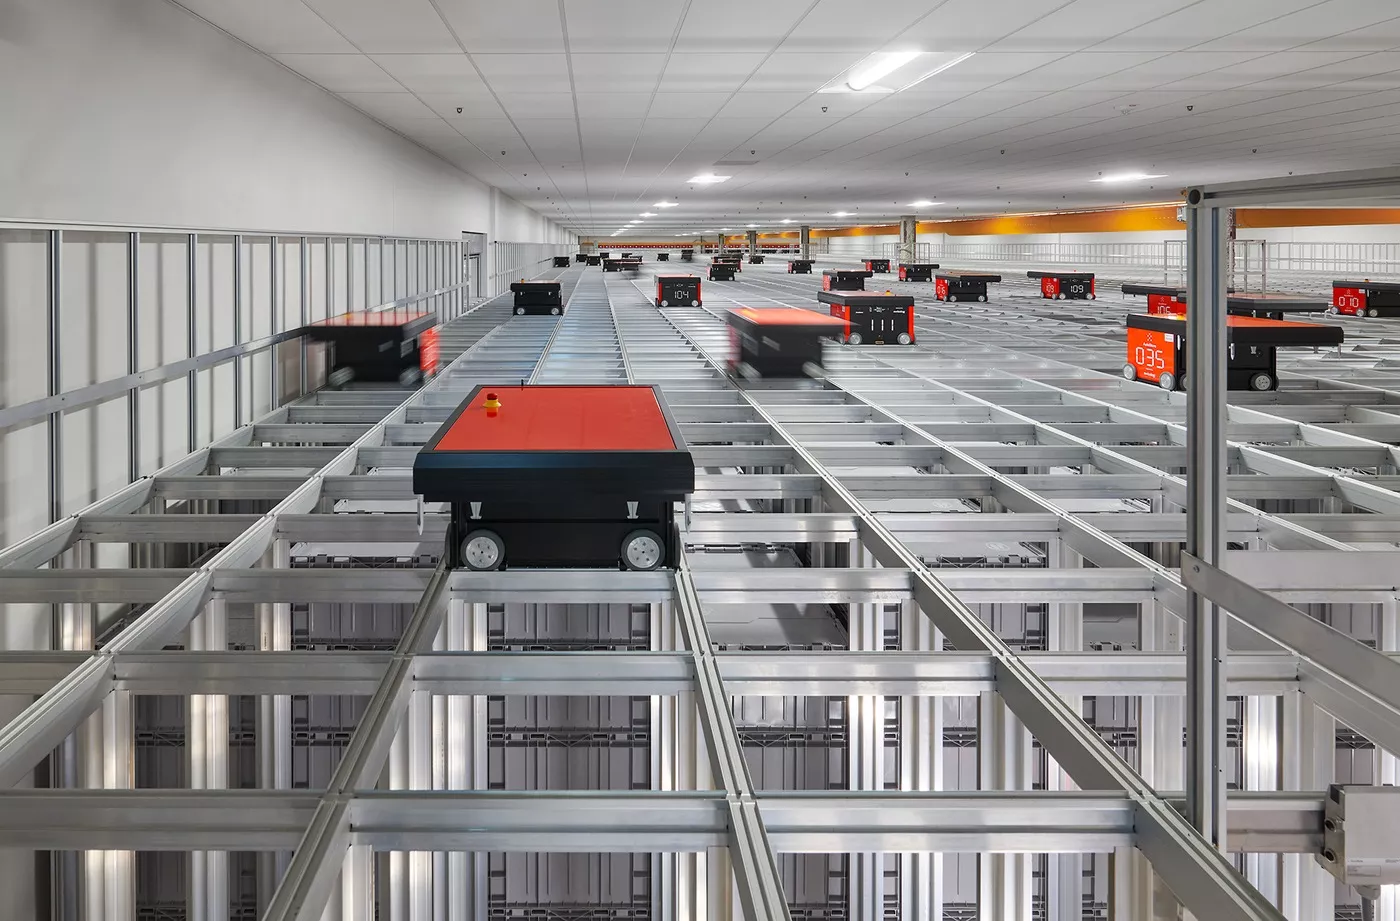 Miles of Files - Robots to Help Manage Billions of Pages at New FBI Central Records Complex